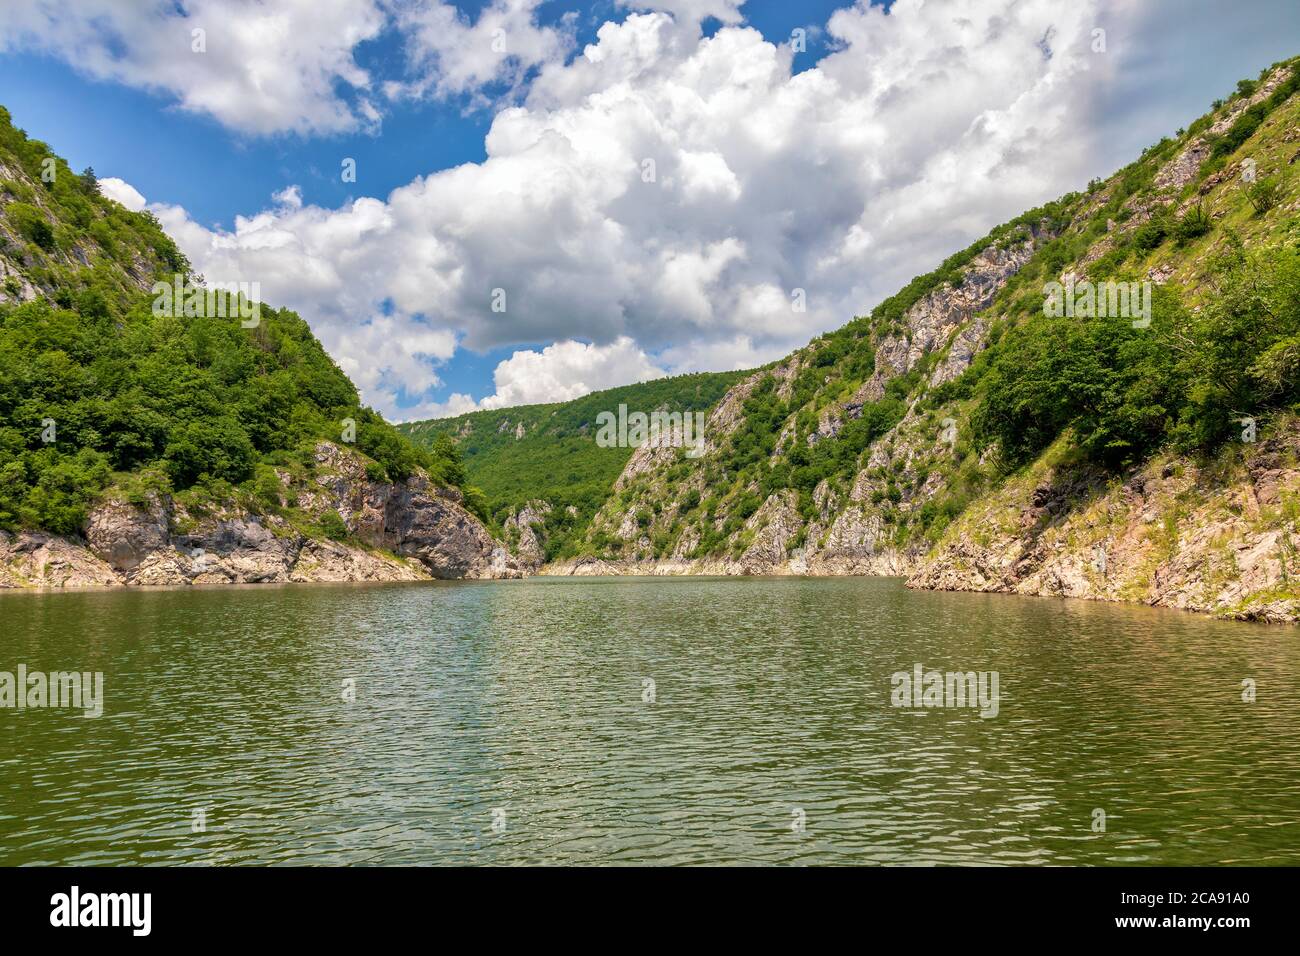 Uvac river canyon meanders. Special Nature Reserve, popular tourist destination in southwestern Serbia. Stock Photo